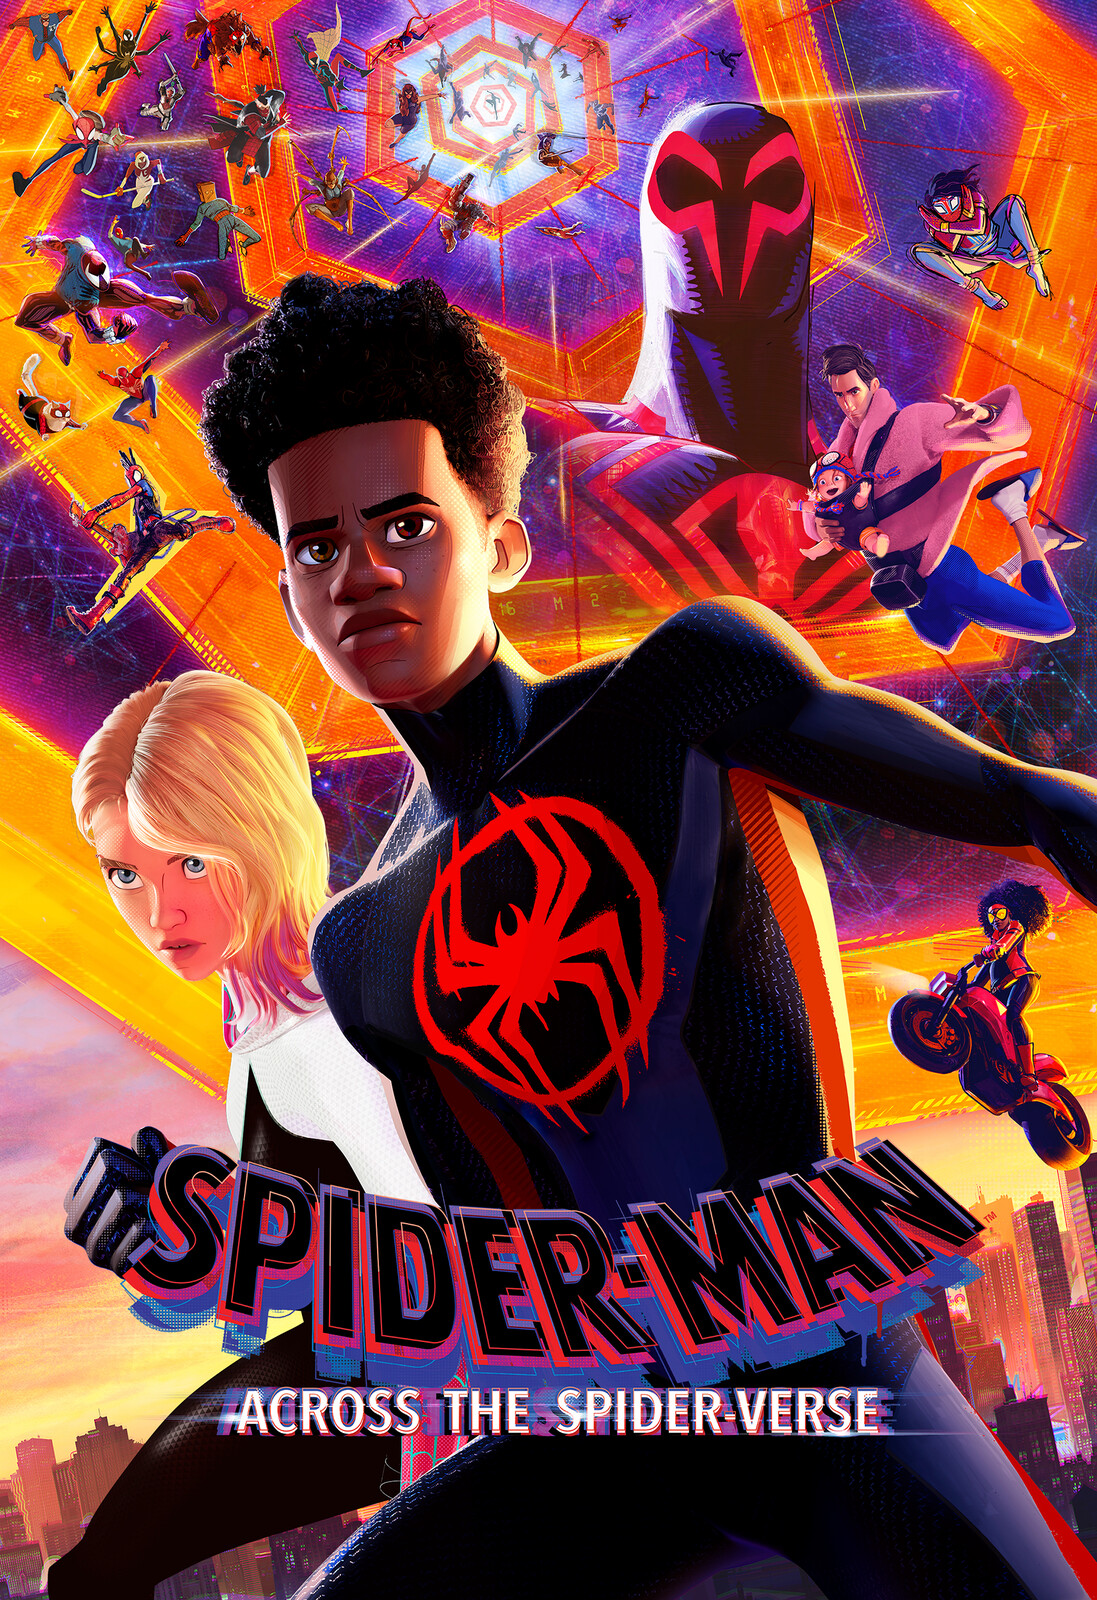 Key Art for Across the Spider-Verse - Miguel 2099